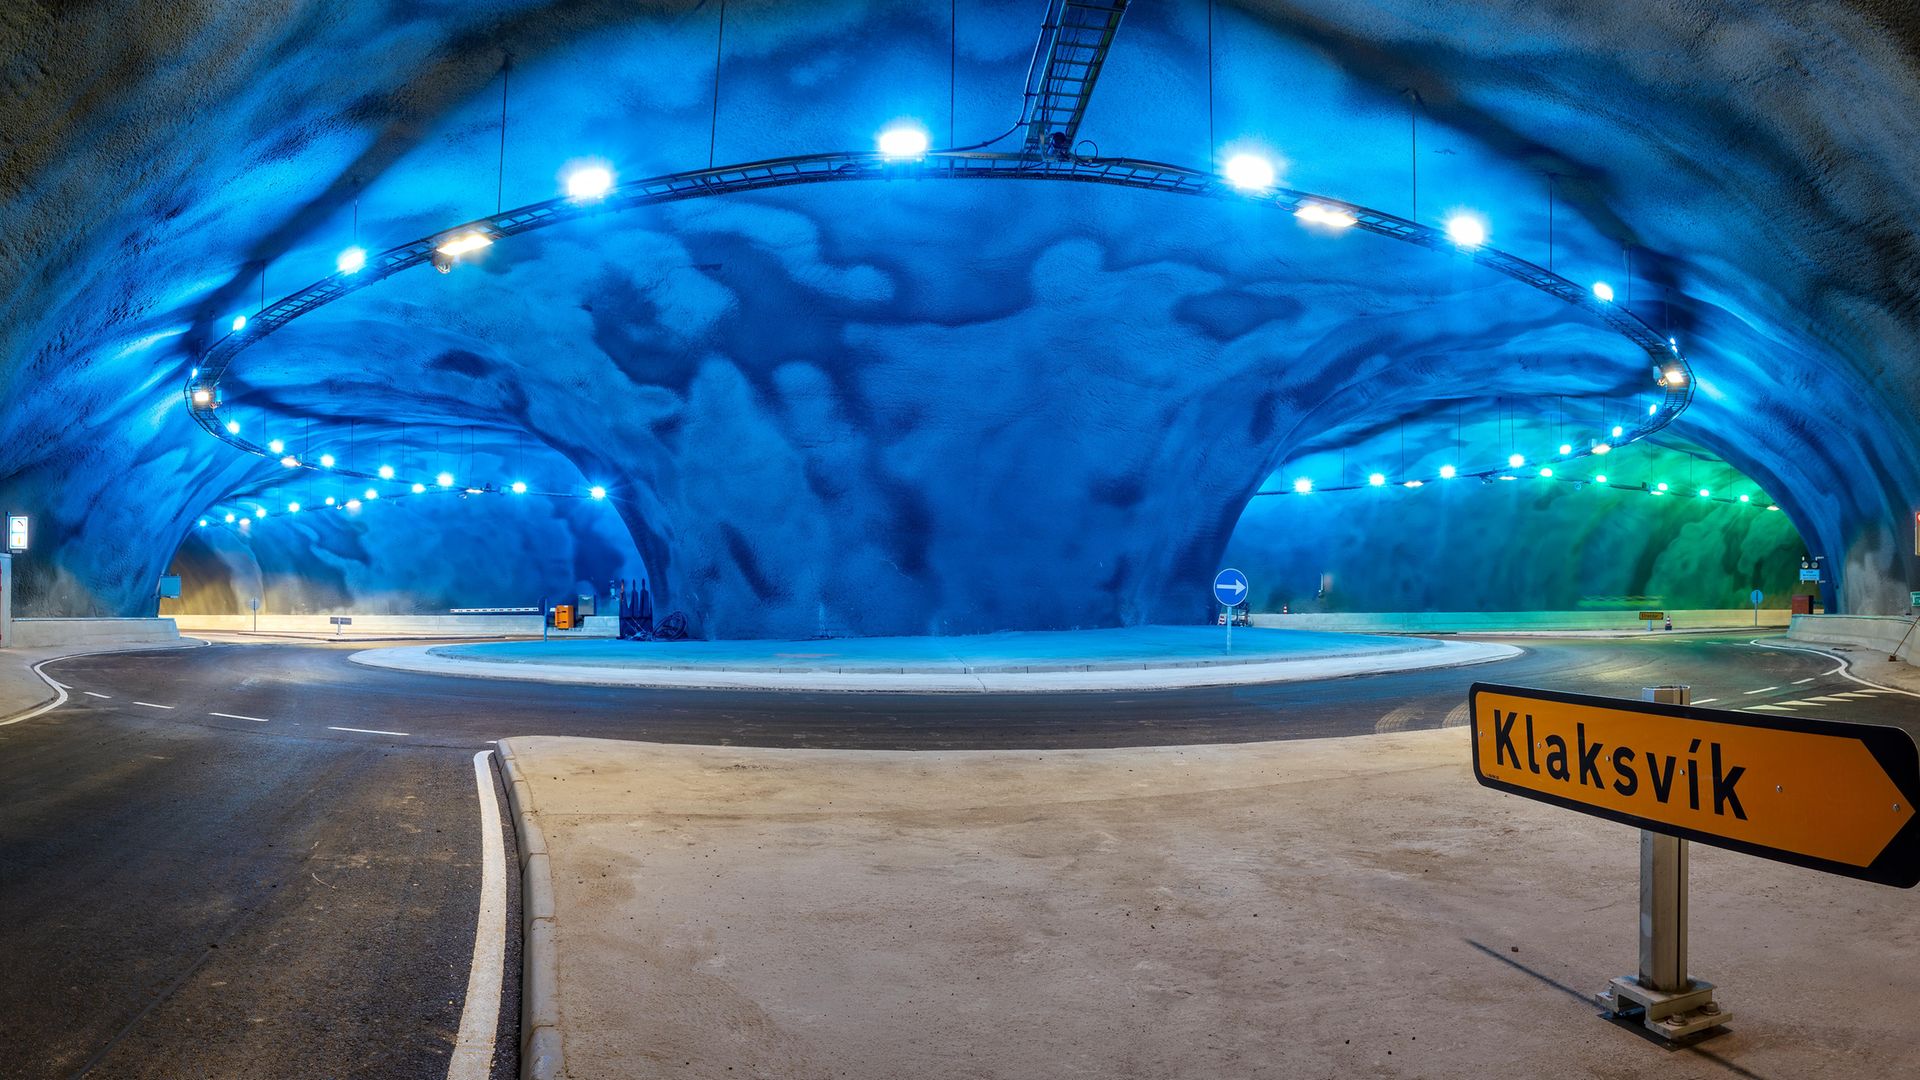 A new undersea roundabout, which forms part of the Faroe Islands' growing tunnel network - Credit: faroephoto.com